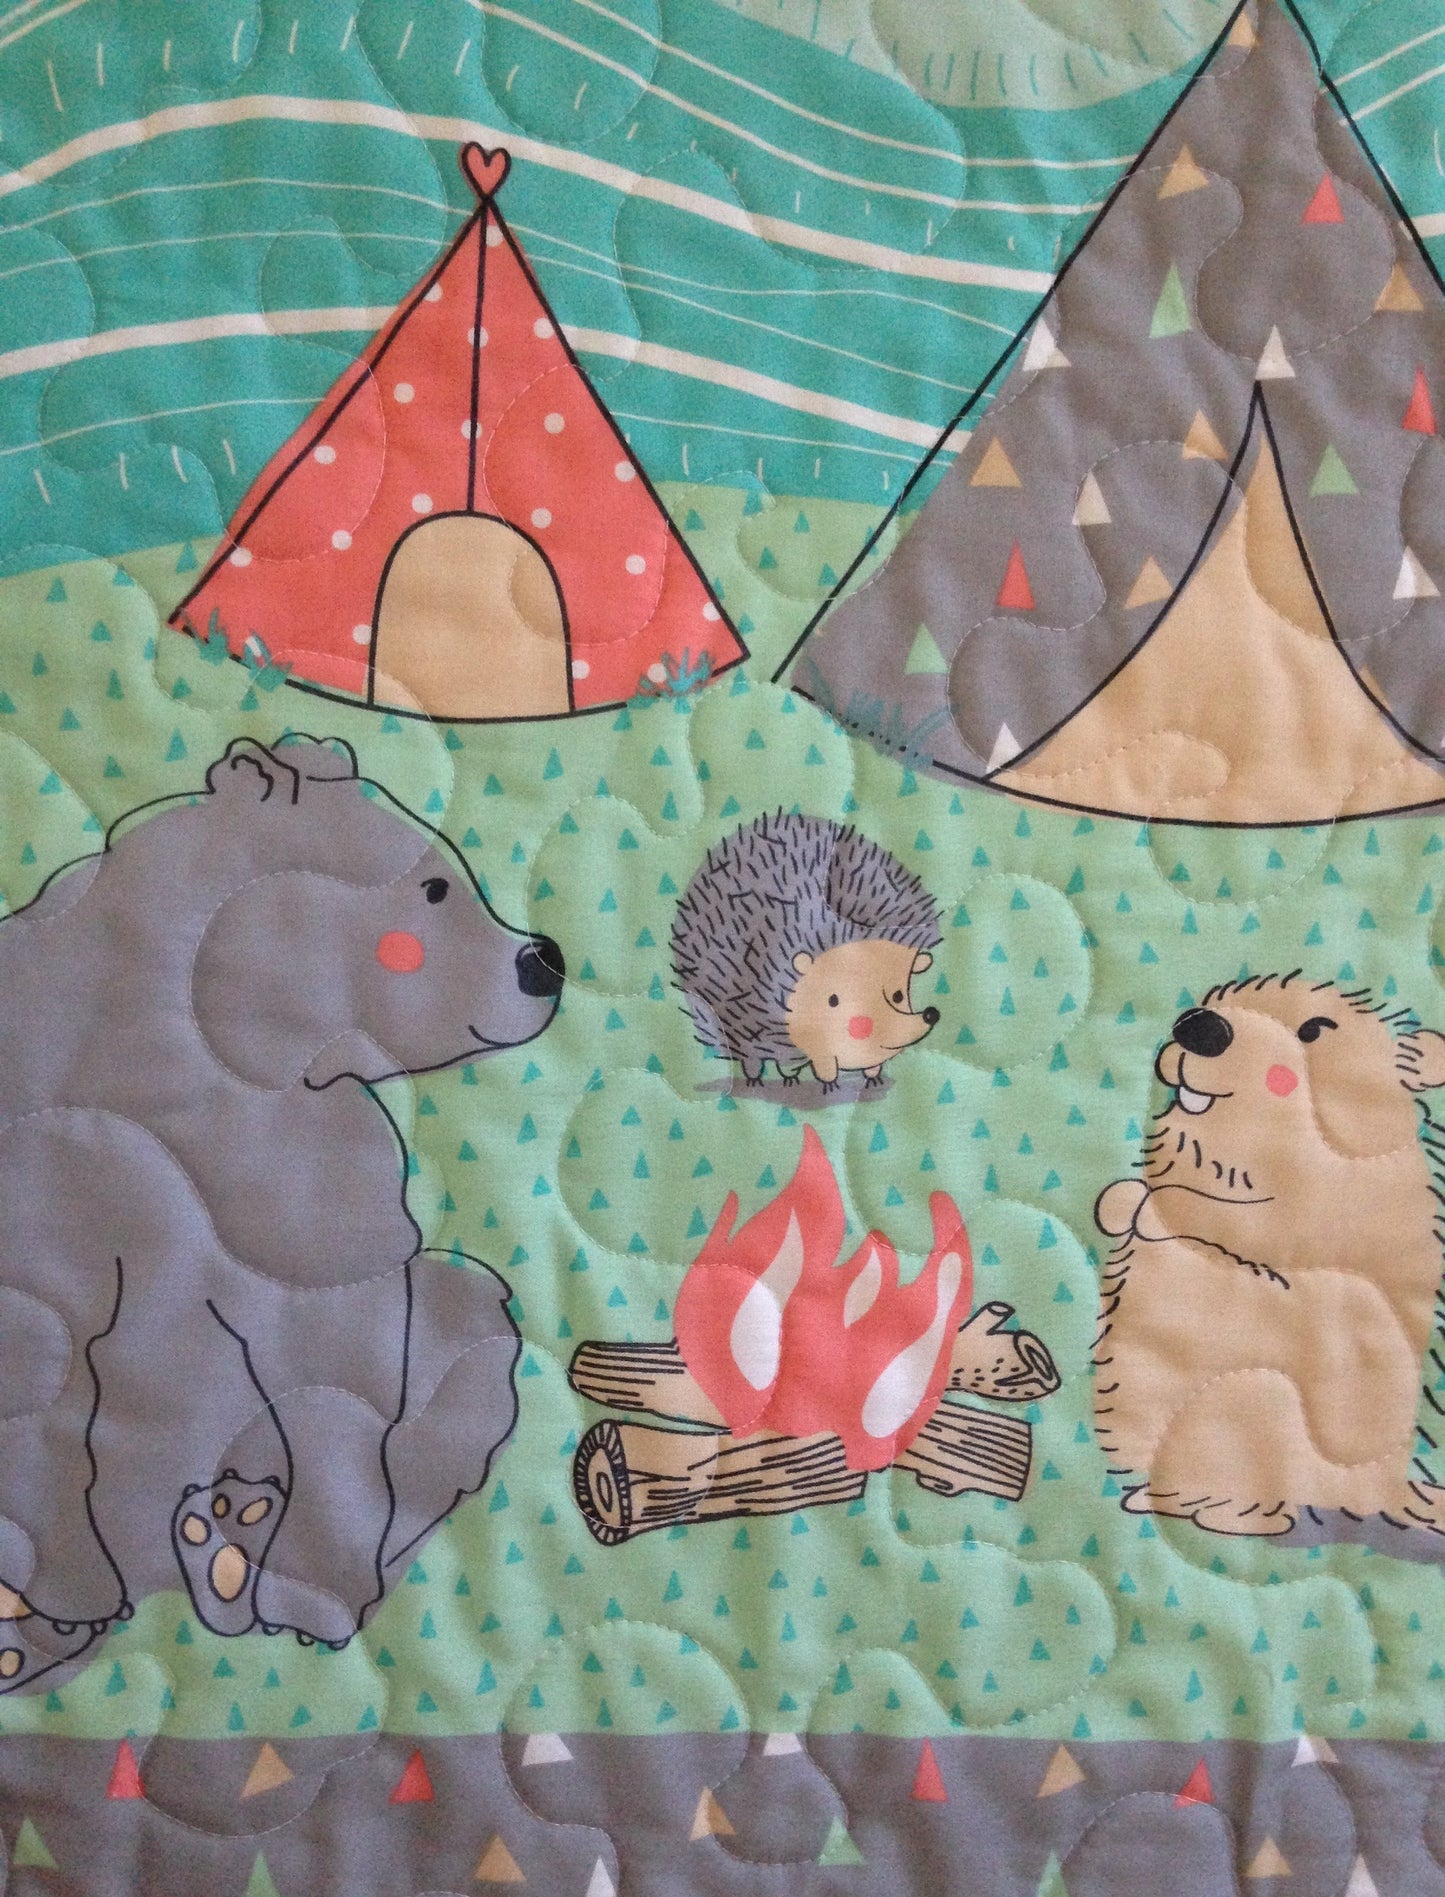 DREAM BIG LITTLE ONE FOREST ANIMALS CAMPING Boho Quilted Blanket